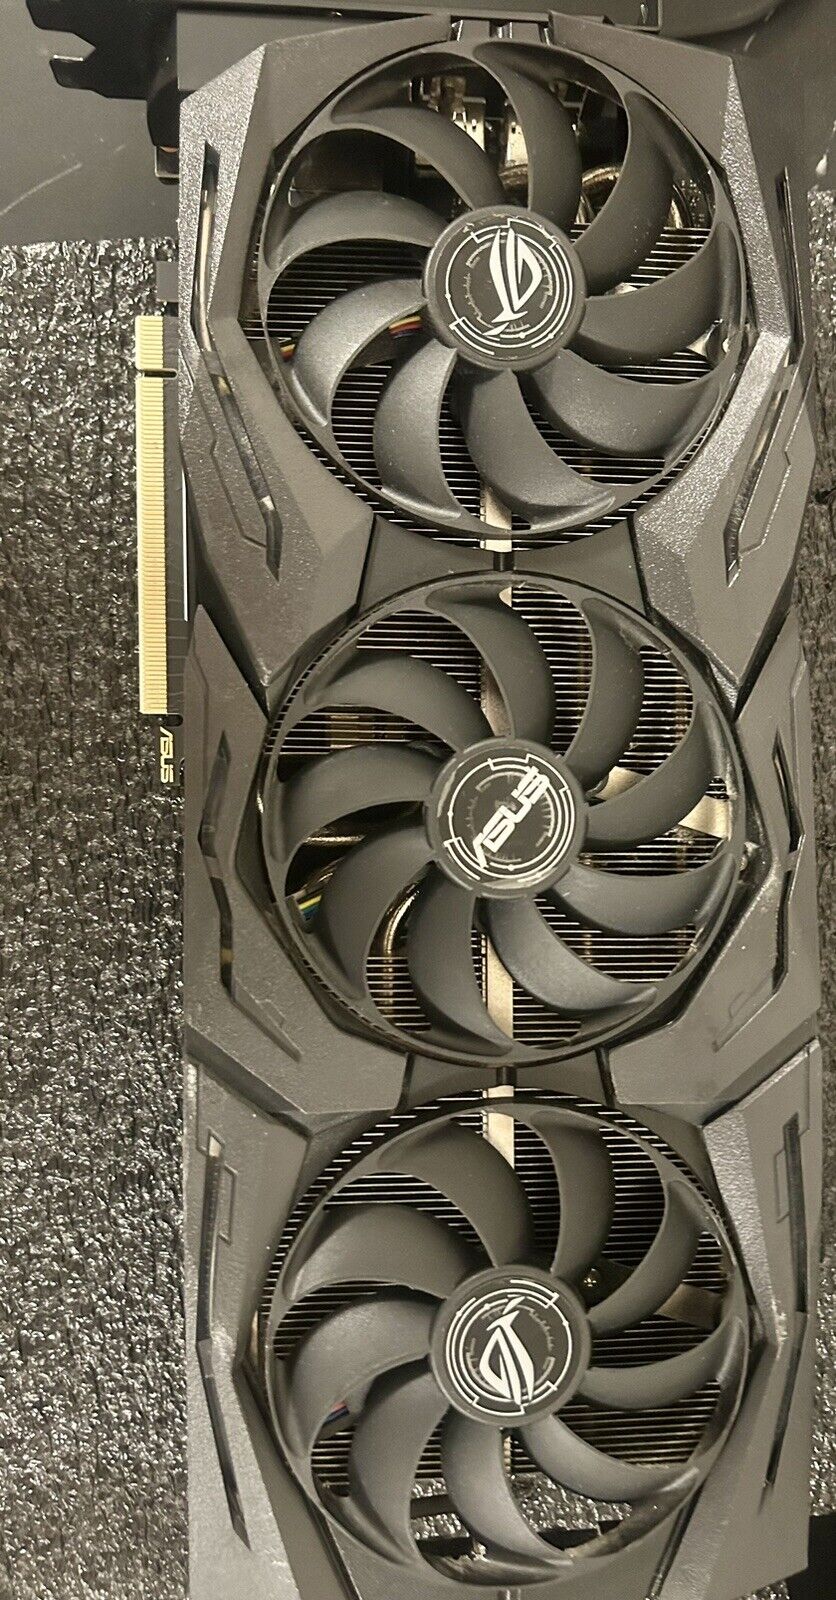 ASUS ROG-STRIX-RTX2070S-A8G-GAMING RTX 2070 Super 8GB Graphics Card